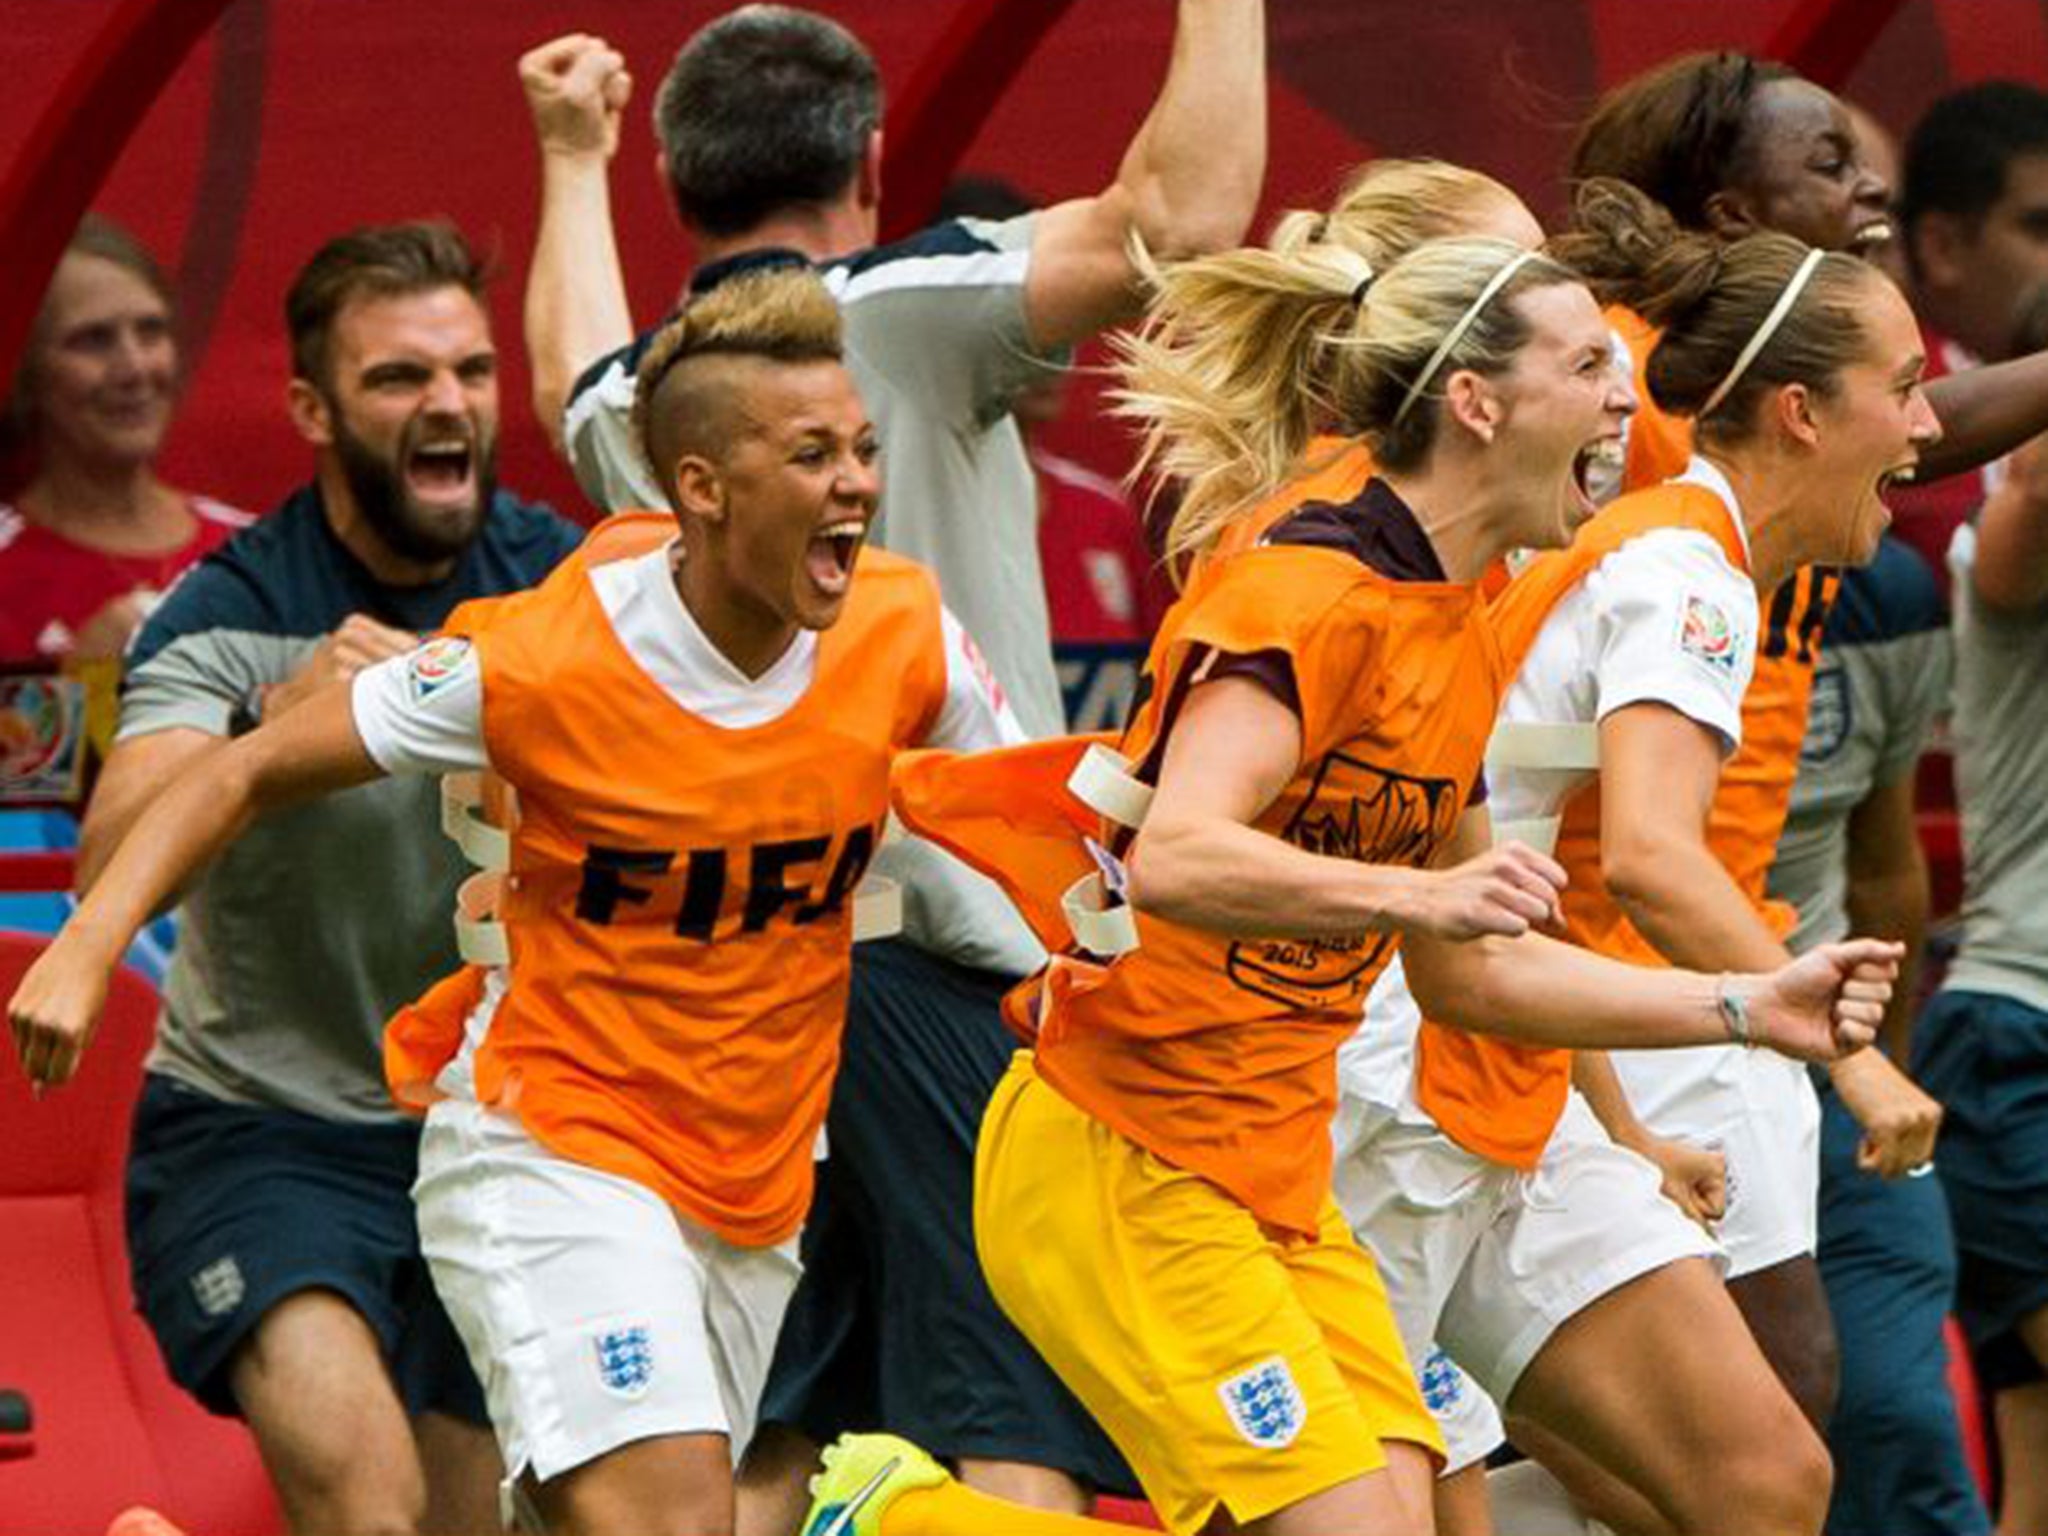 England players and coaching staff celebrate their quarter-final victory over host nation Canada at the Women’s World Cup early on Sunday